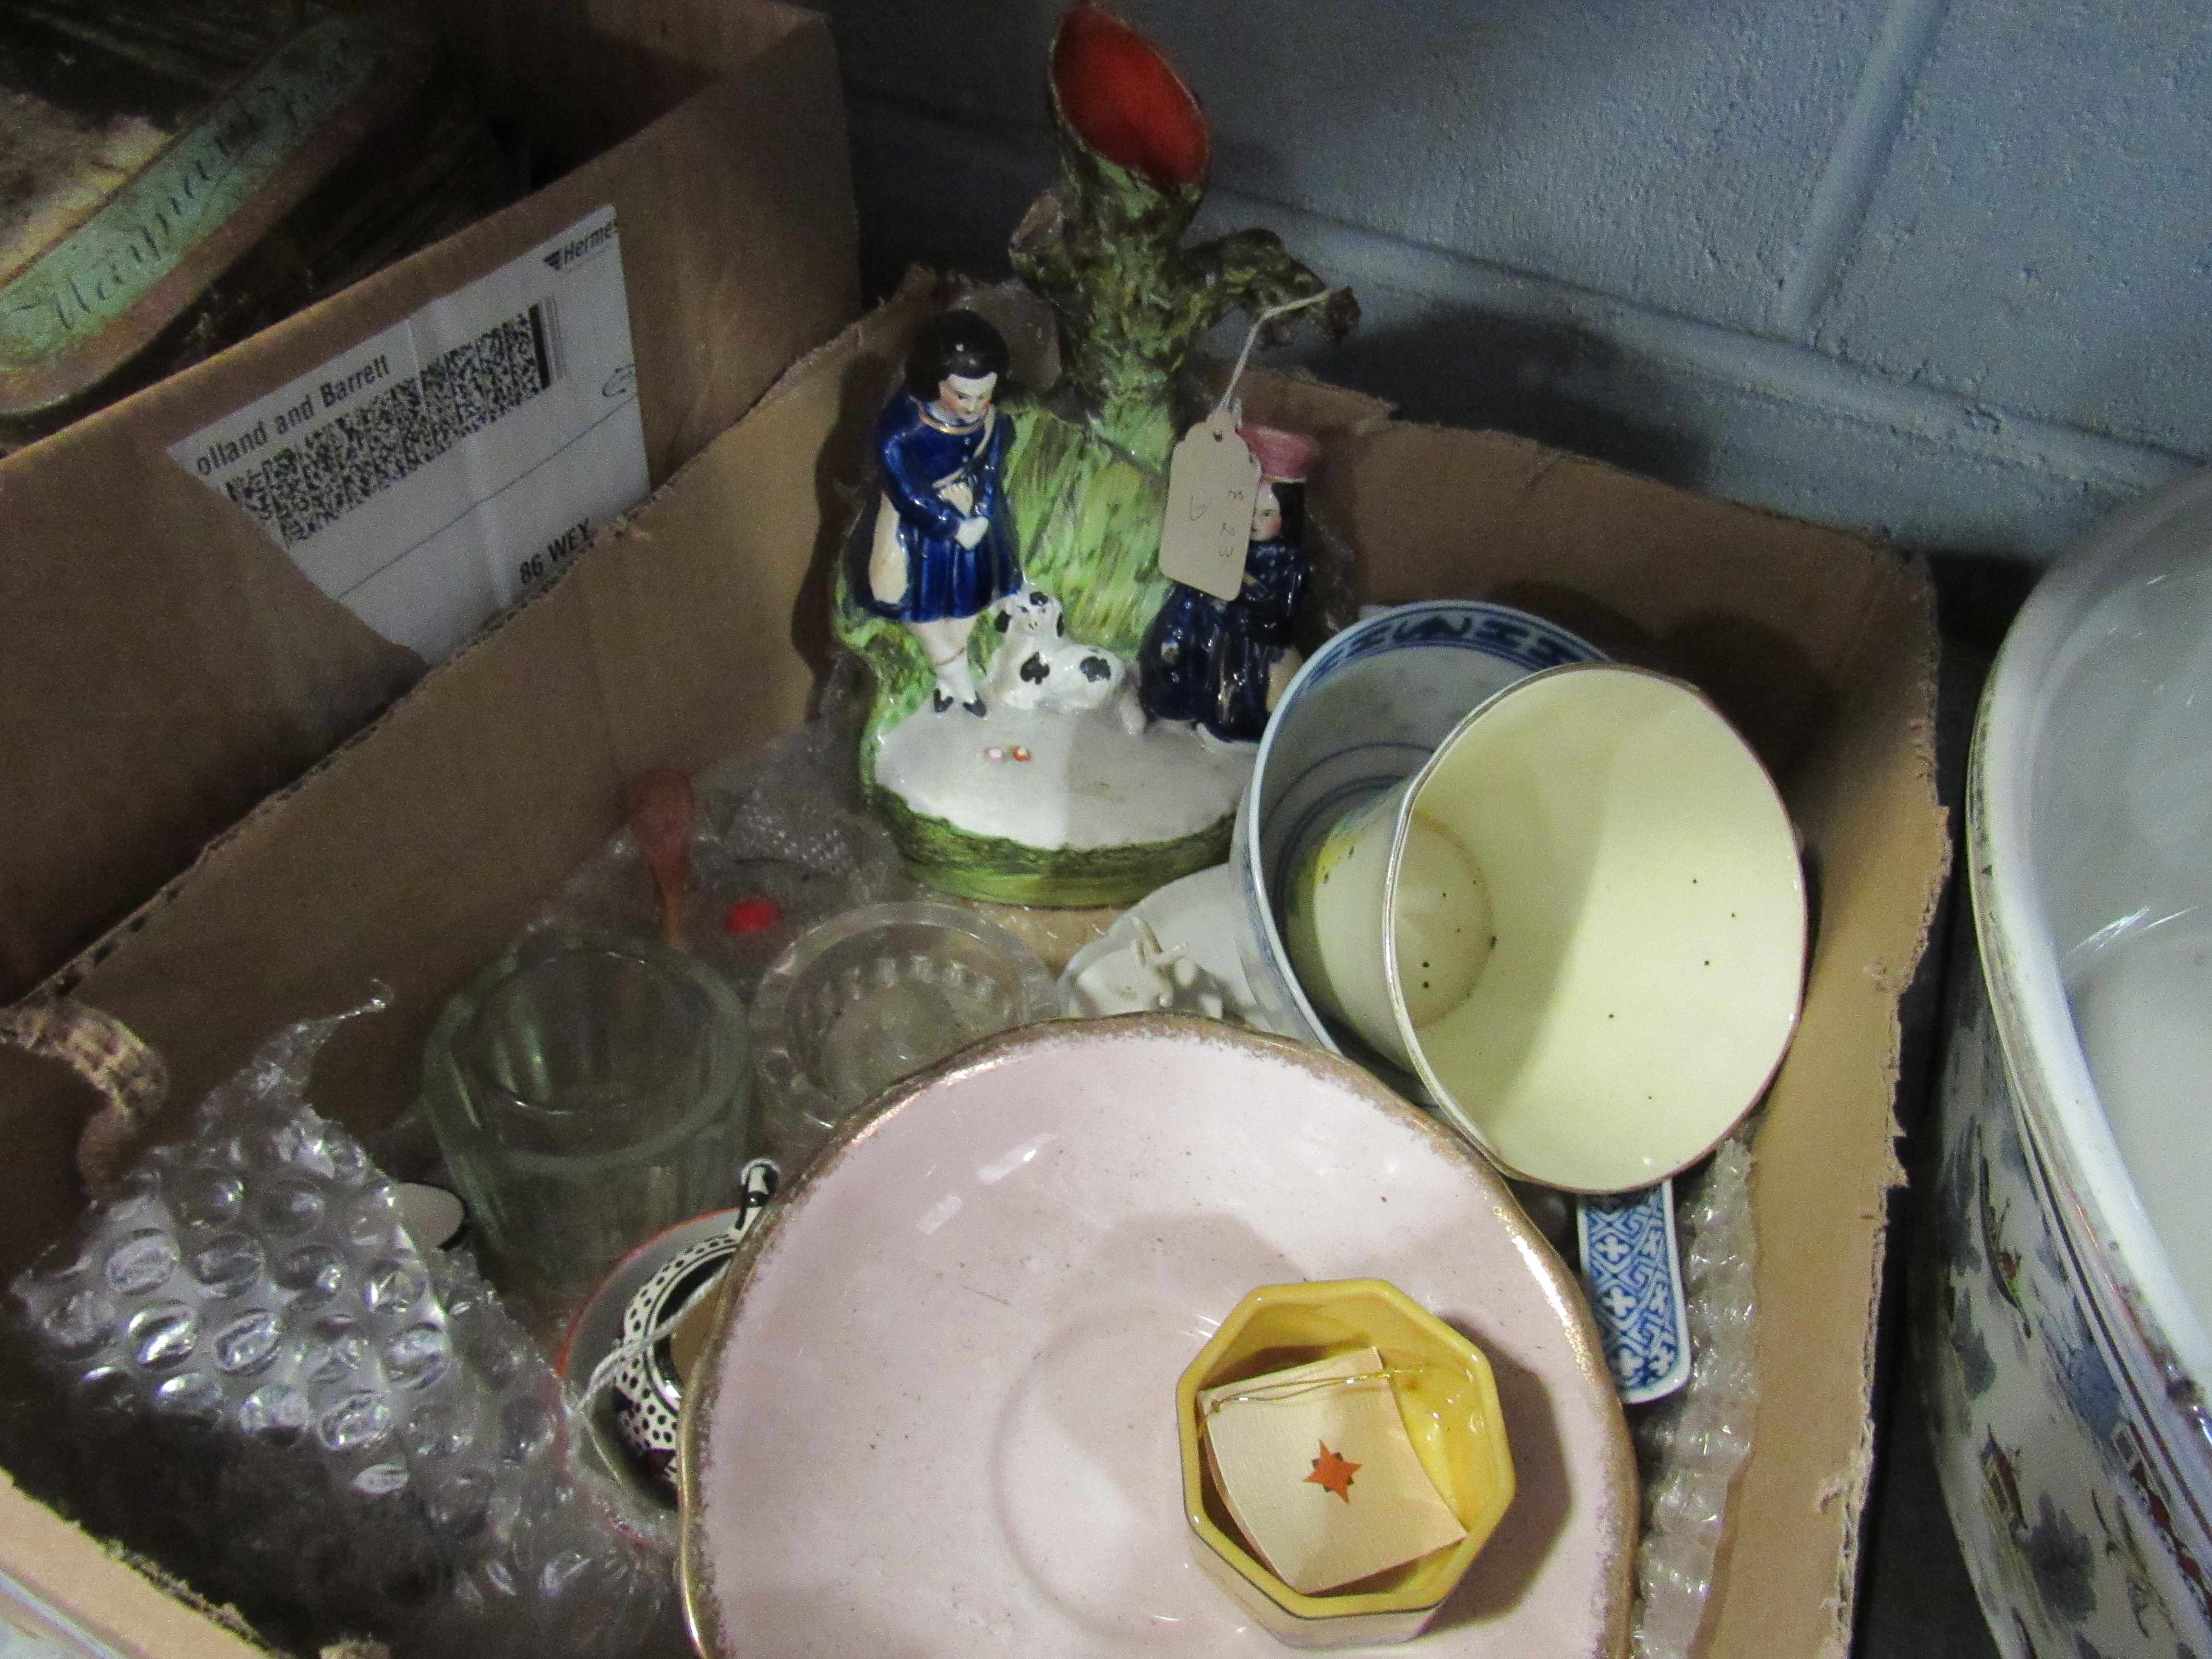 A box of miscellaneous items including spill vase